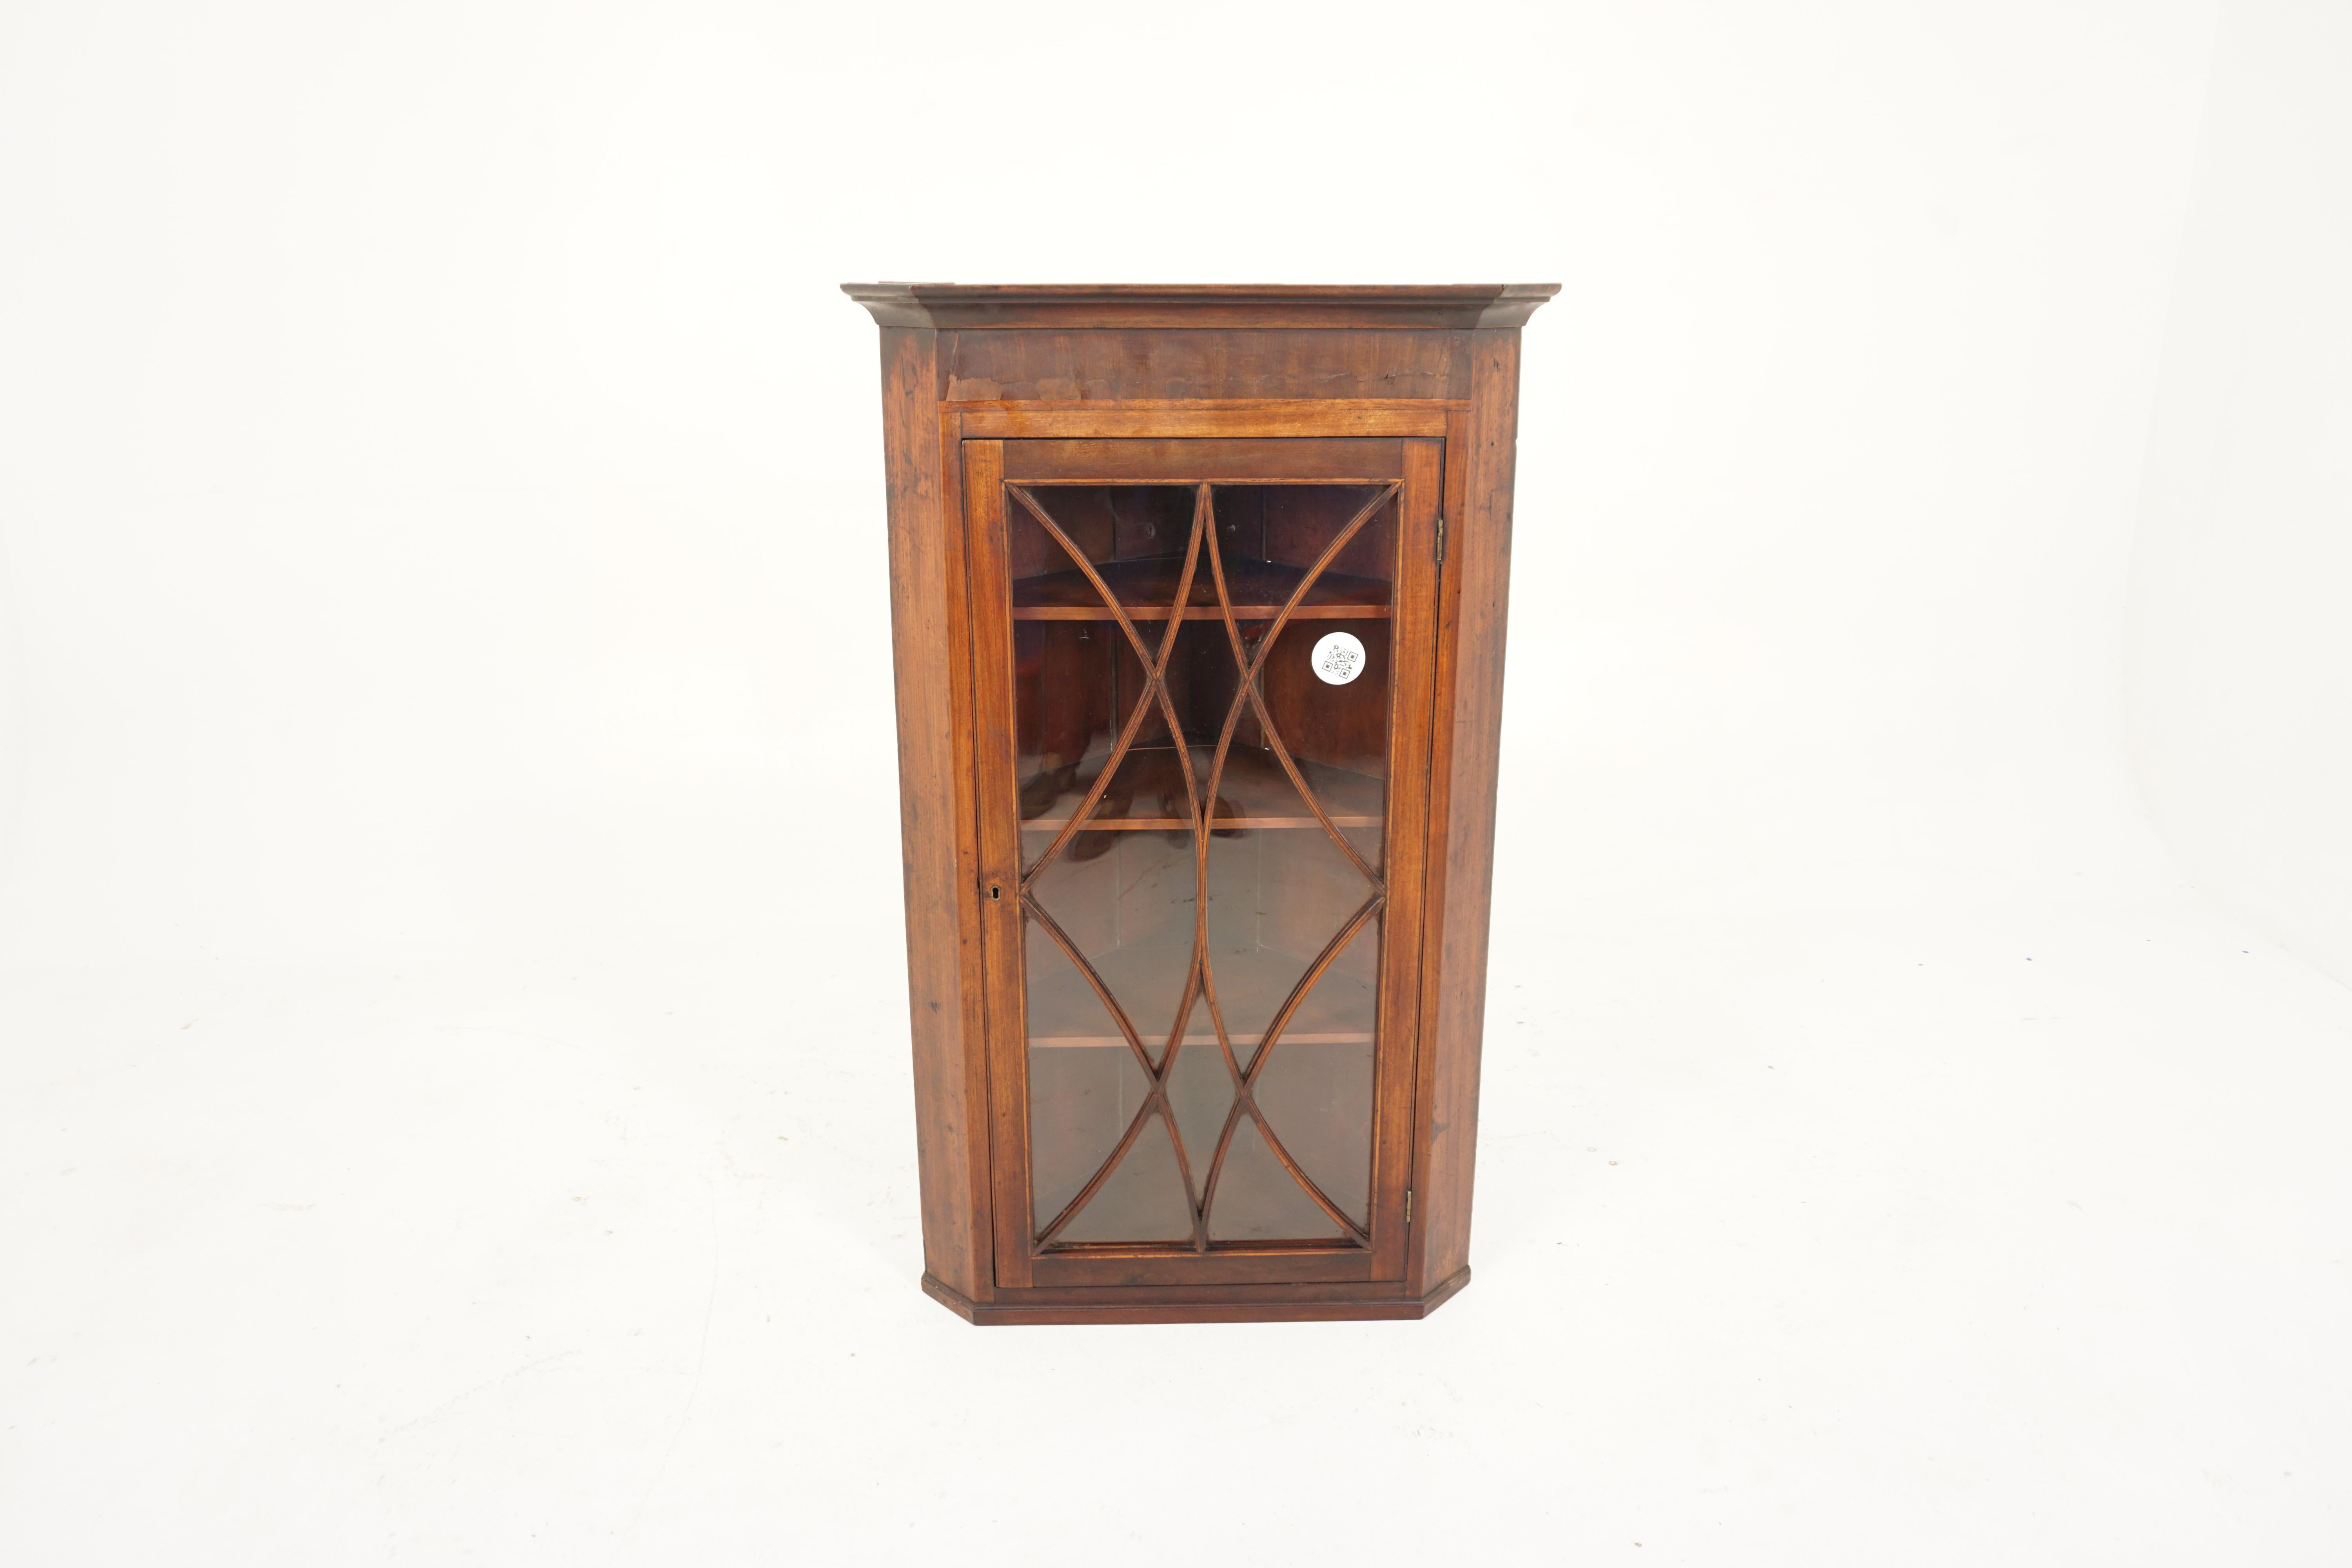 Ant. Victorian walnut inlaid wall hanging corner cabinet, display cabinet, Scotland 1820, H808

Scotland 1820
Solid walnut
Original finish
Overhang cornice on top
Single glass door with mouldings to the front
Thirteen panes of glass
Opens to